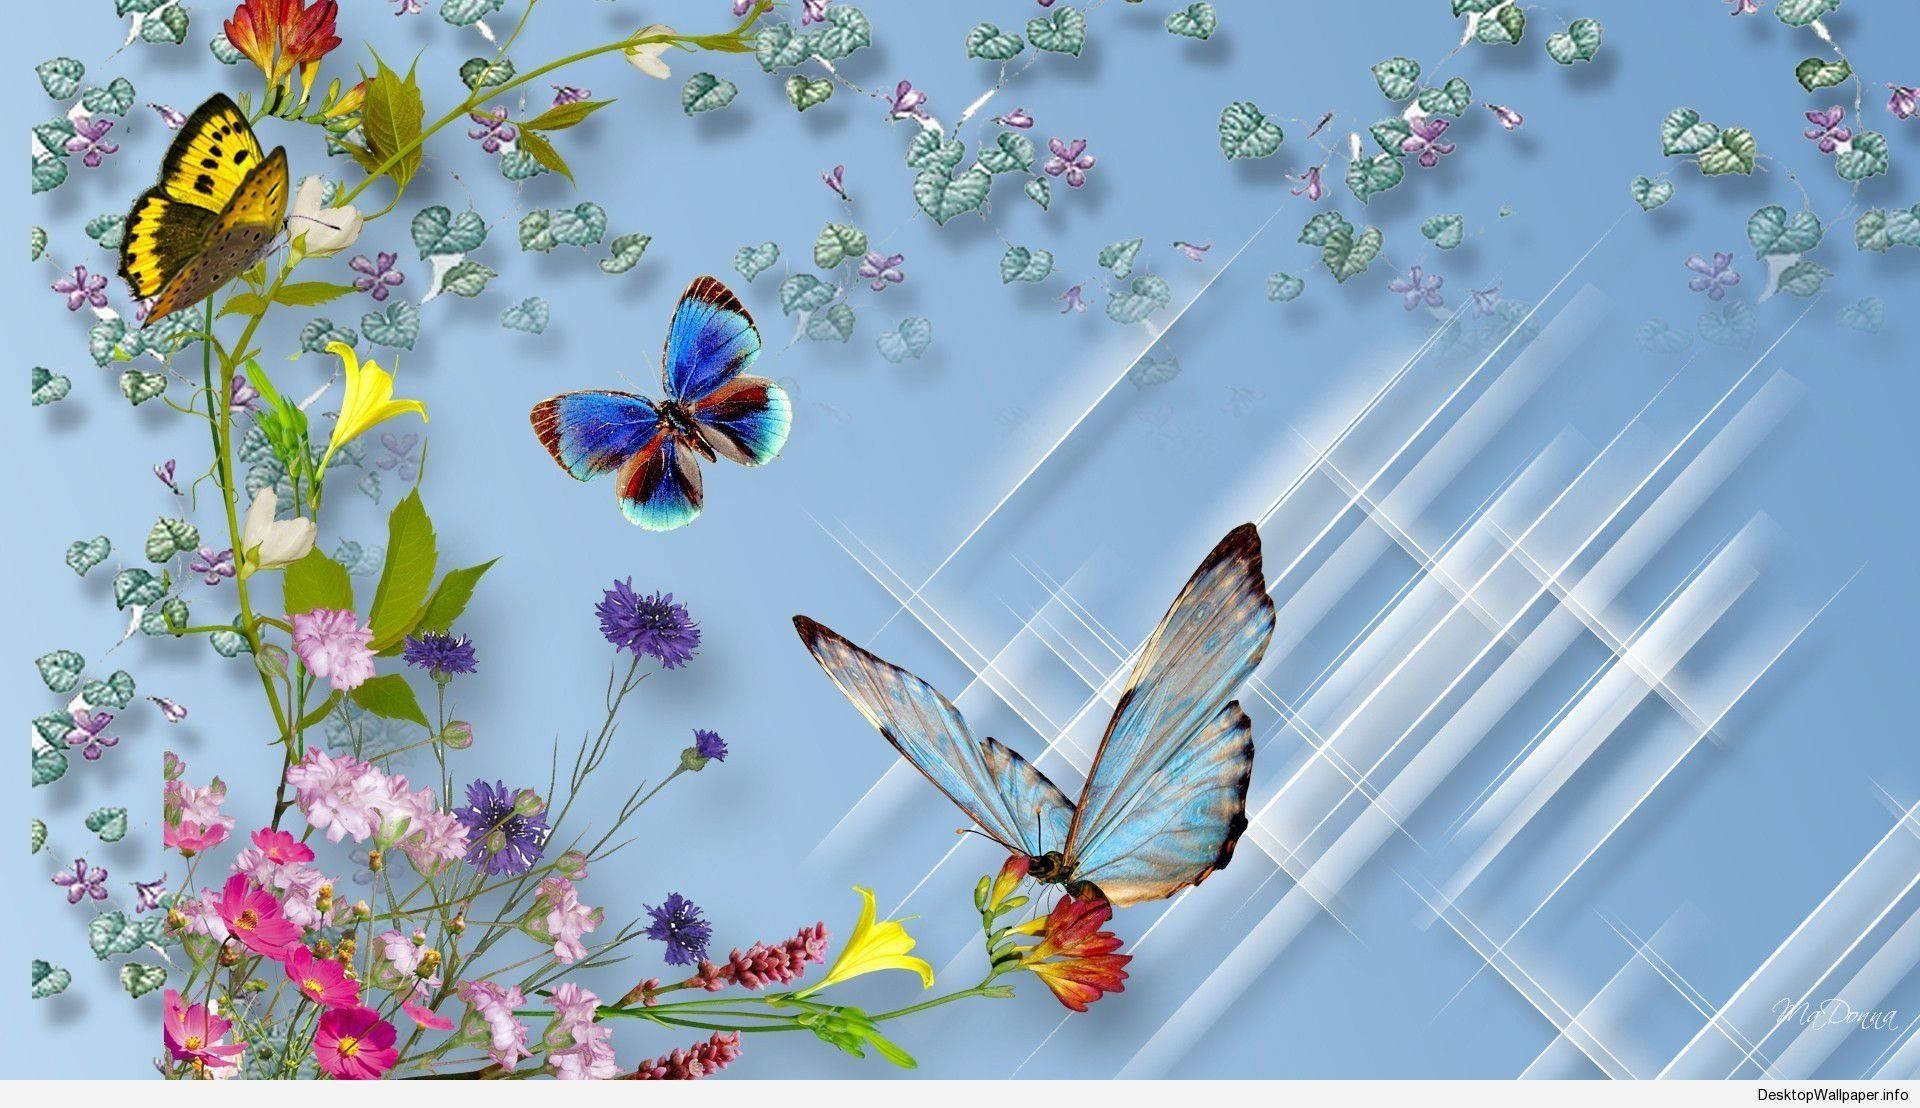 Wallpaper Of Butterfly Download